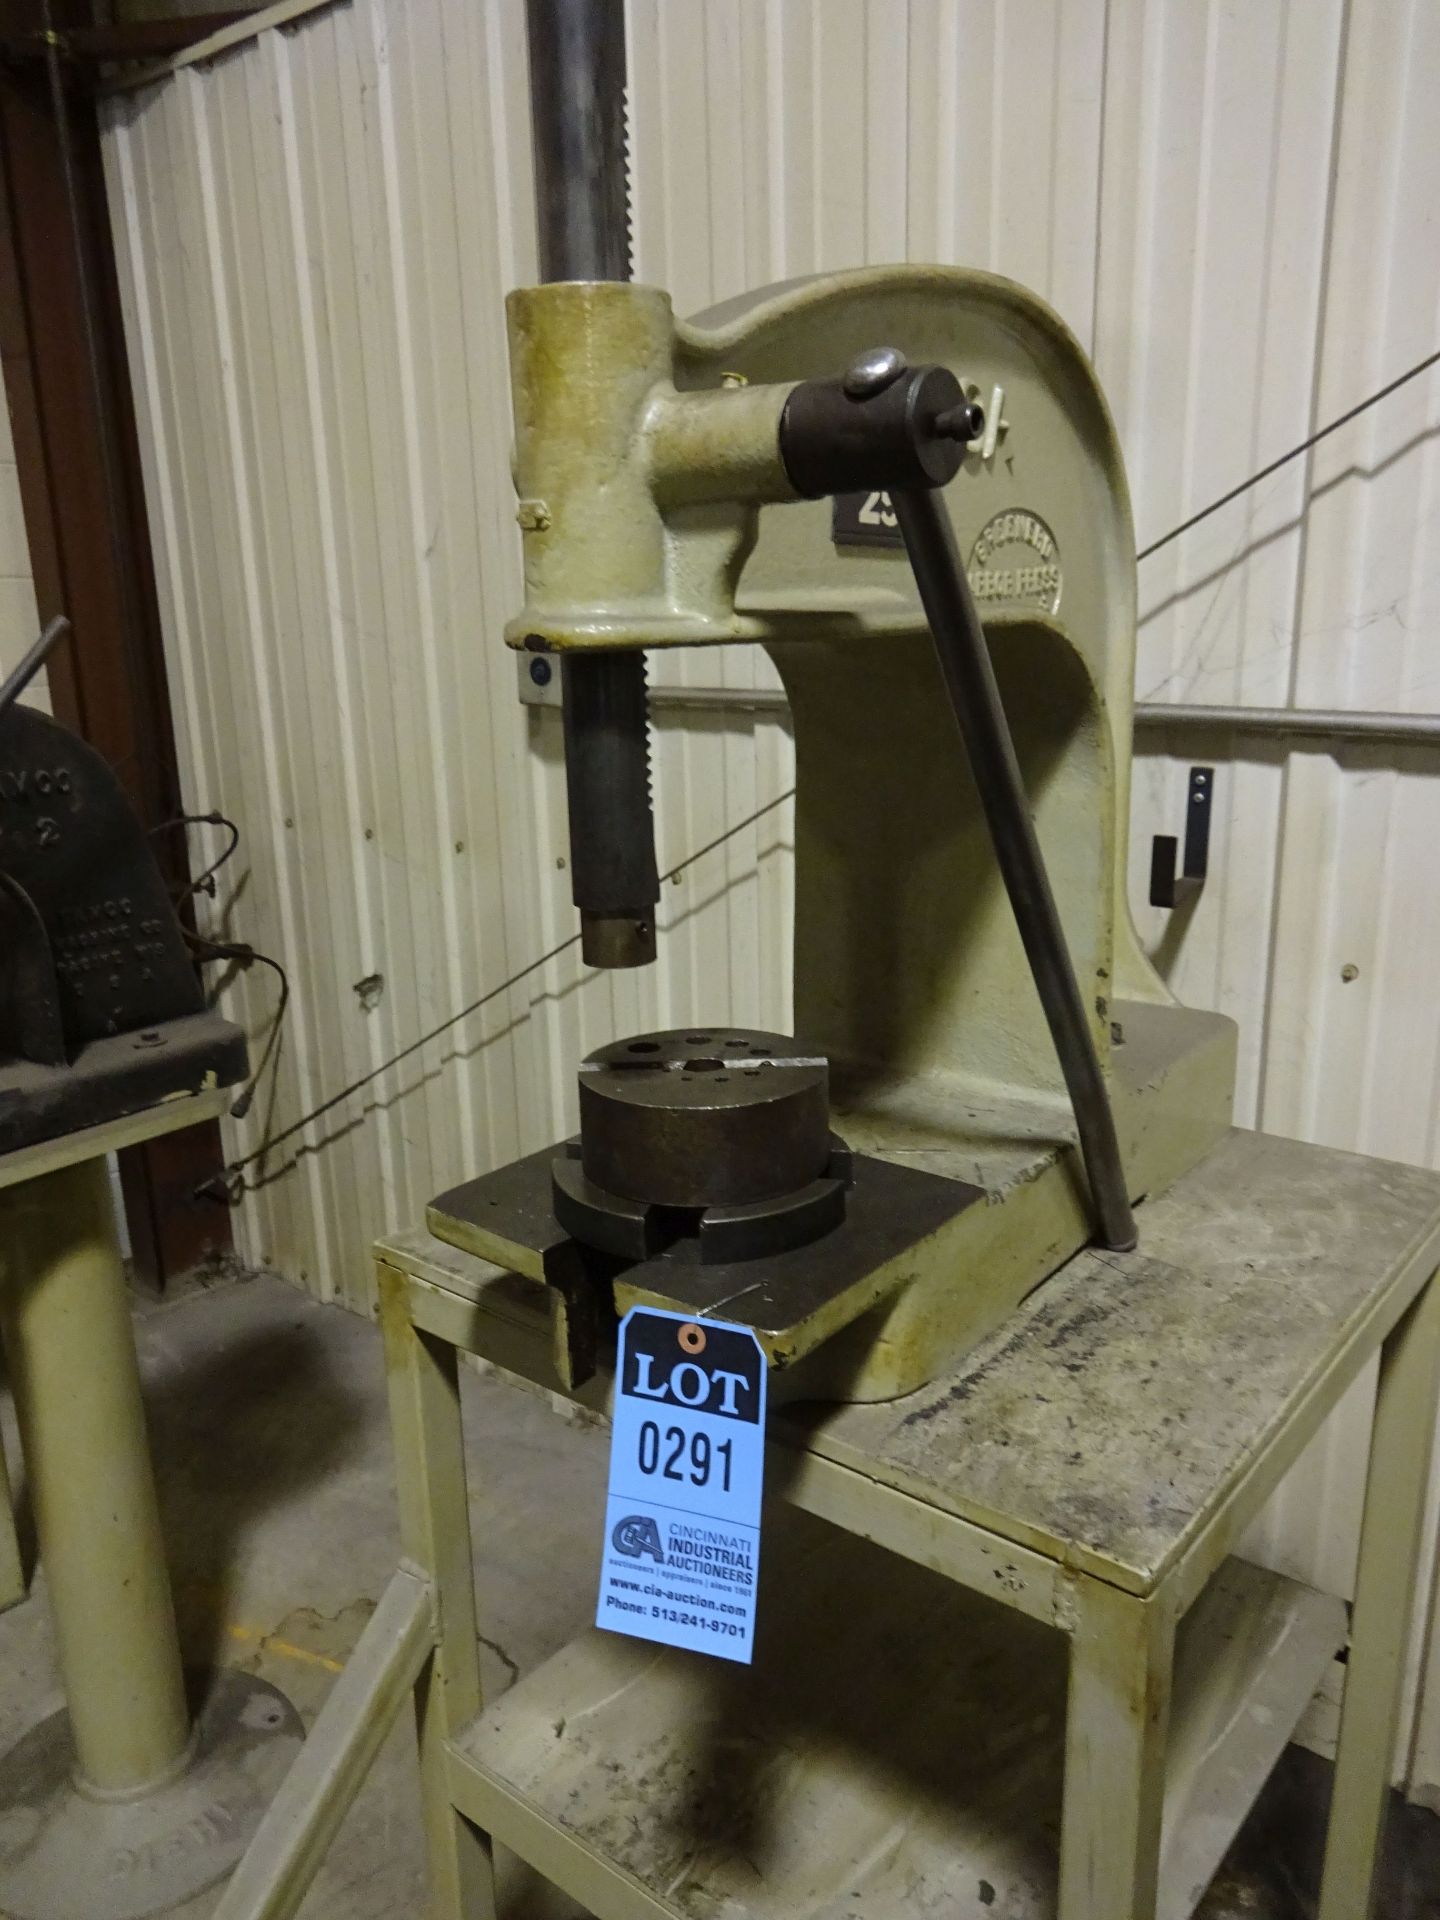 GREENERD NO. 3A ARBOR PRESS WITH STAND